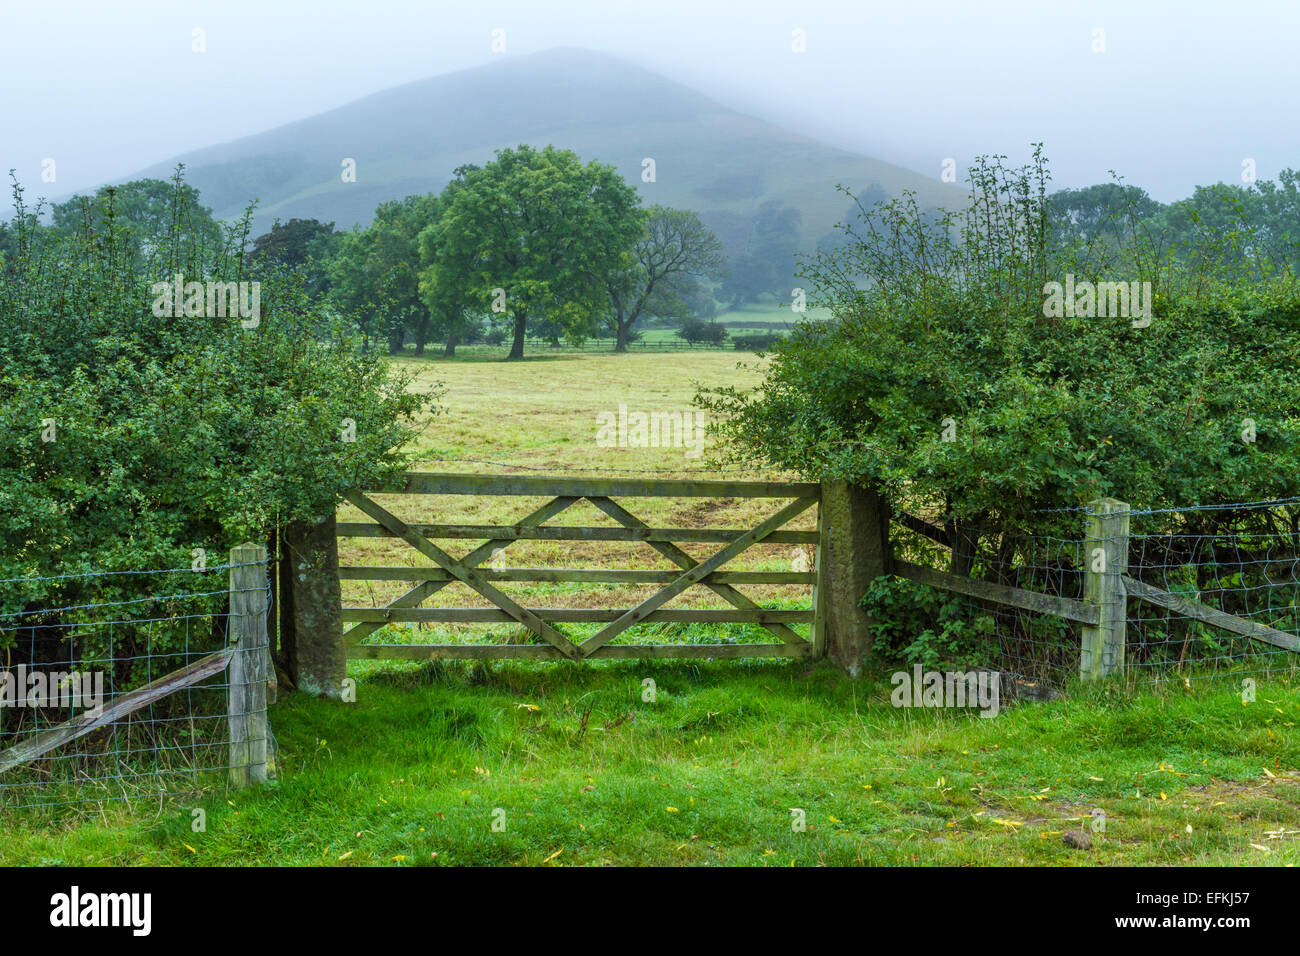 Bad weather approaching. Low cloud covering a hill in the countryside. Vale of Edale, Derbyshire, Peak District, England, UK. Stock Photo